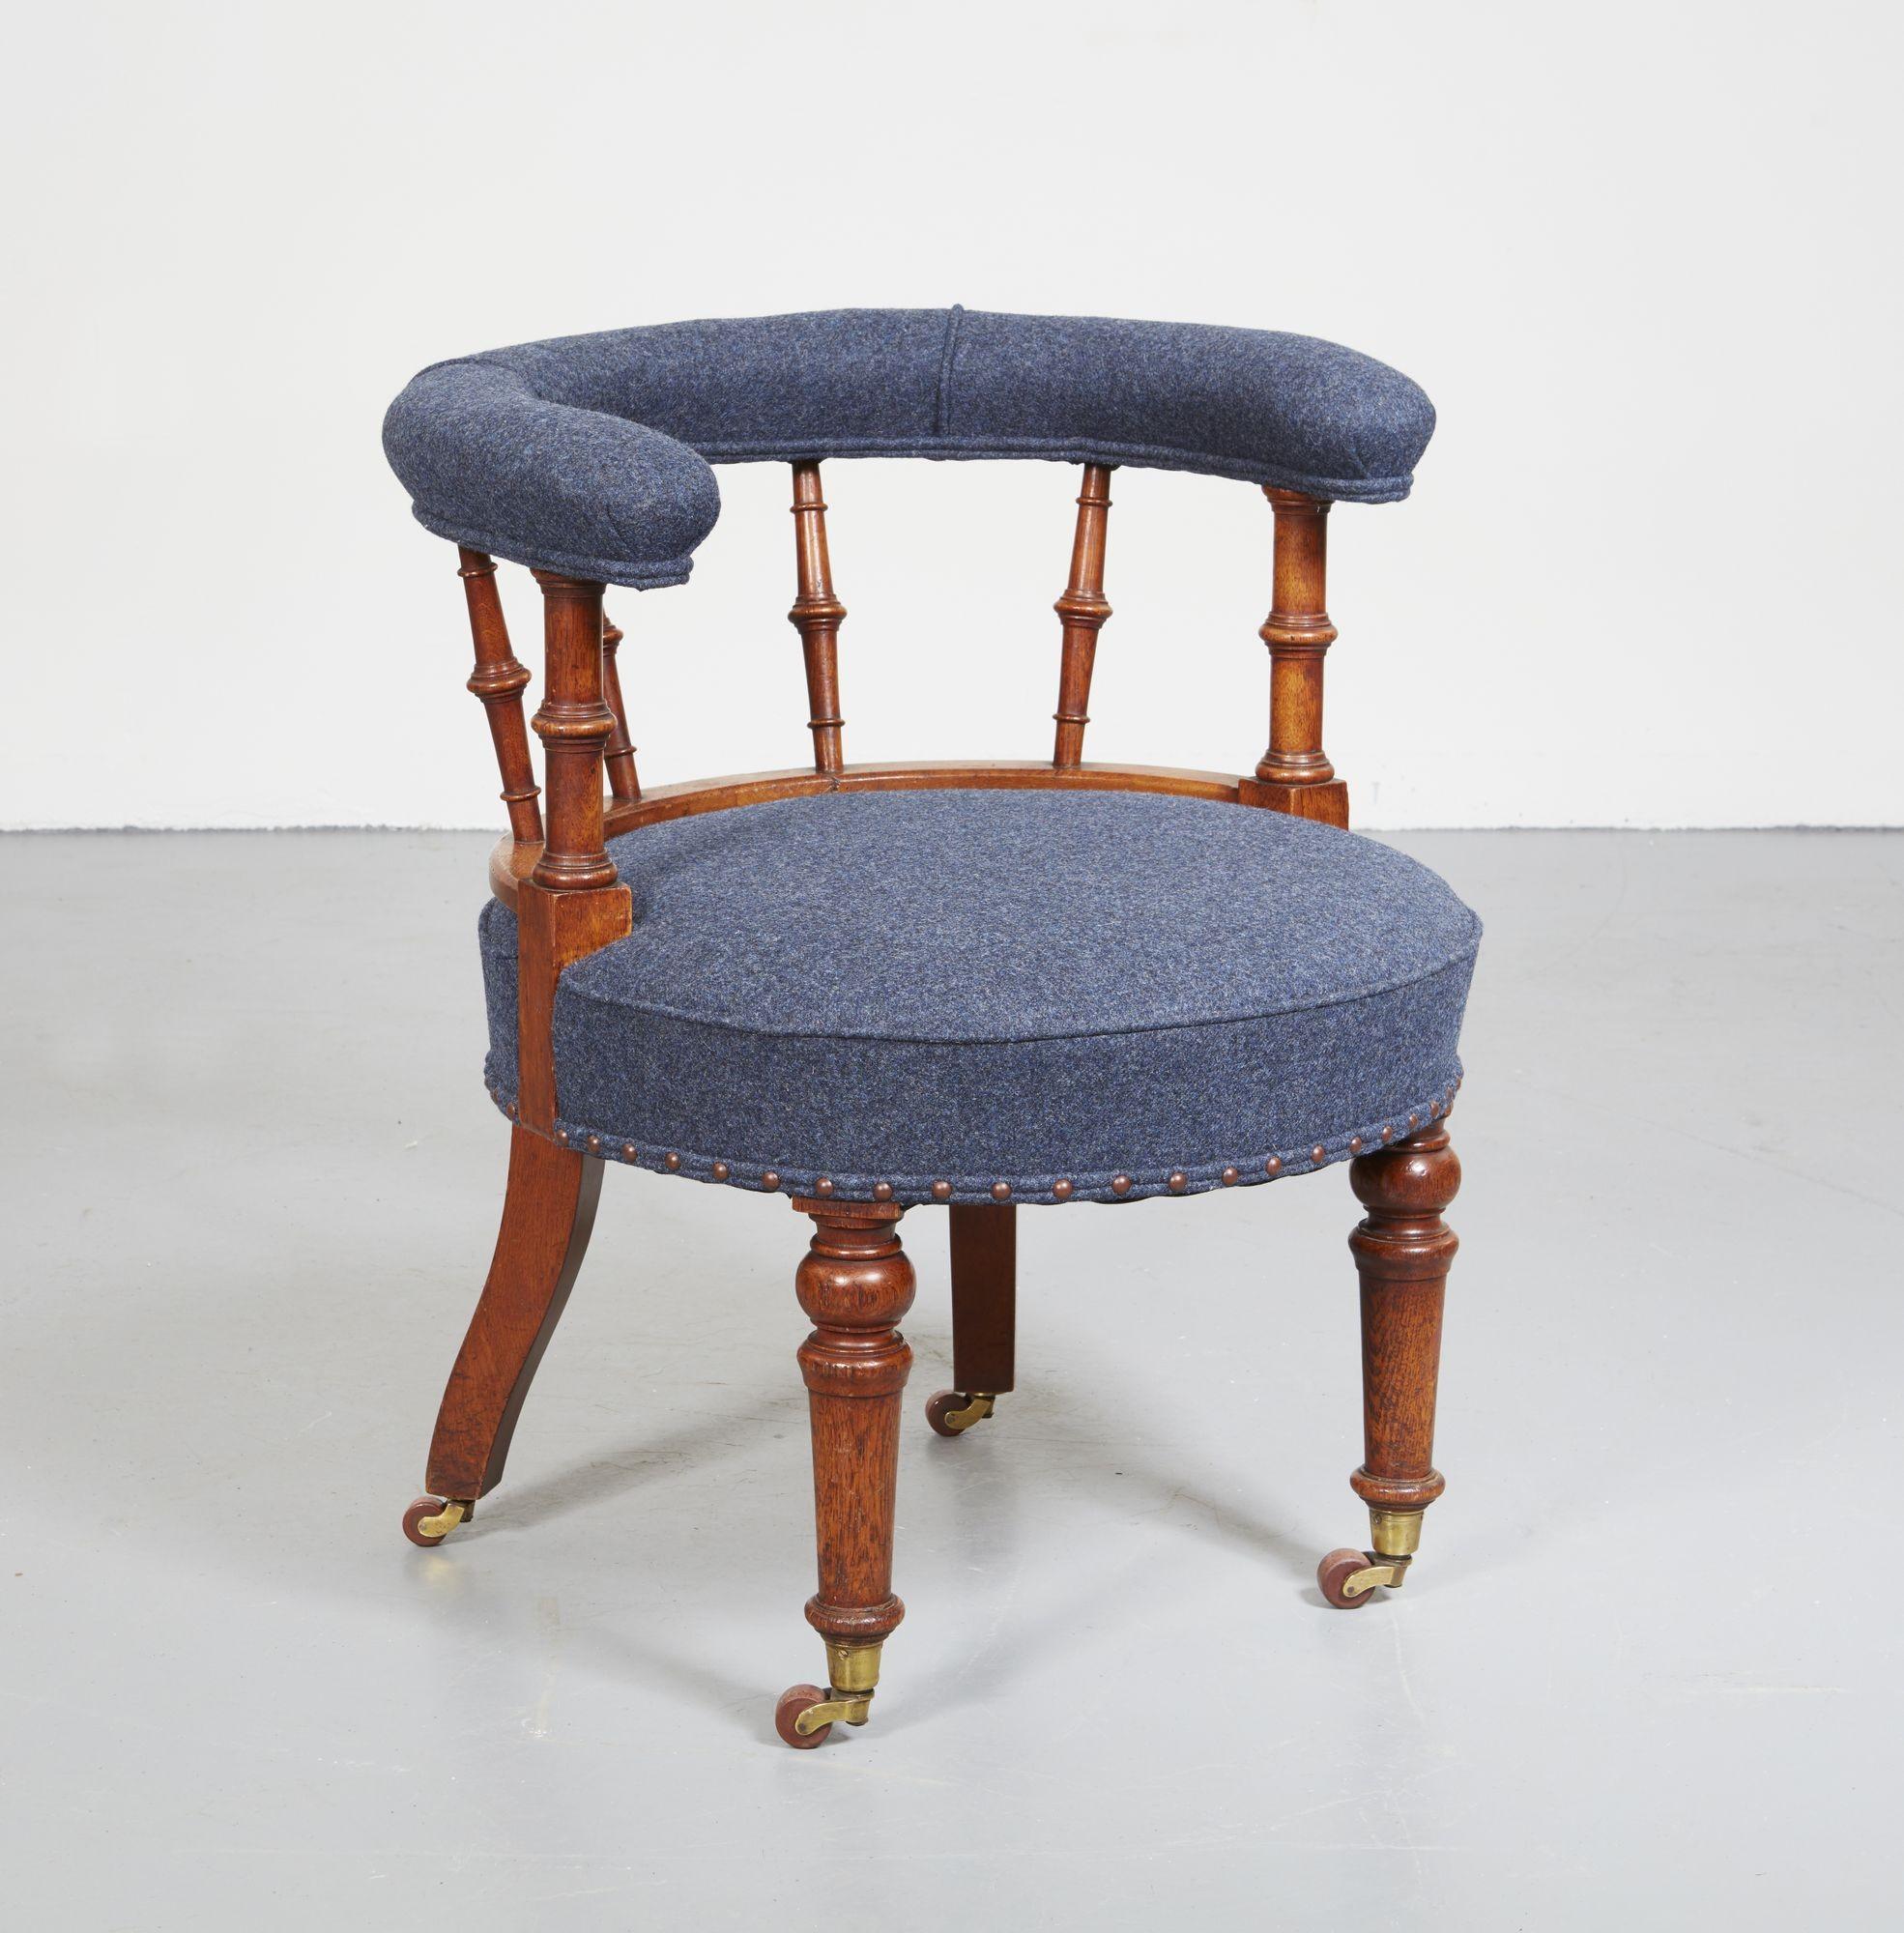 A 19th century Scottish country house circular chair with circular upholstered seat and curved upholstered back on turned spindle supports, with front turned legs and back sabre legs, on original brass castors. Upholstered in blue-grey wool. 